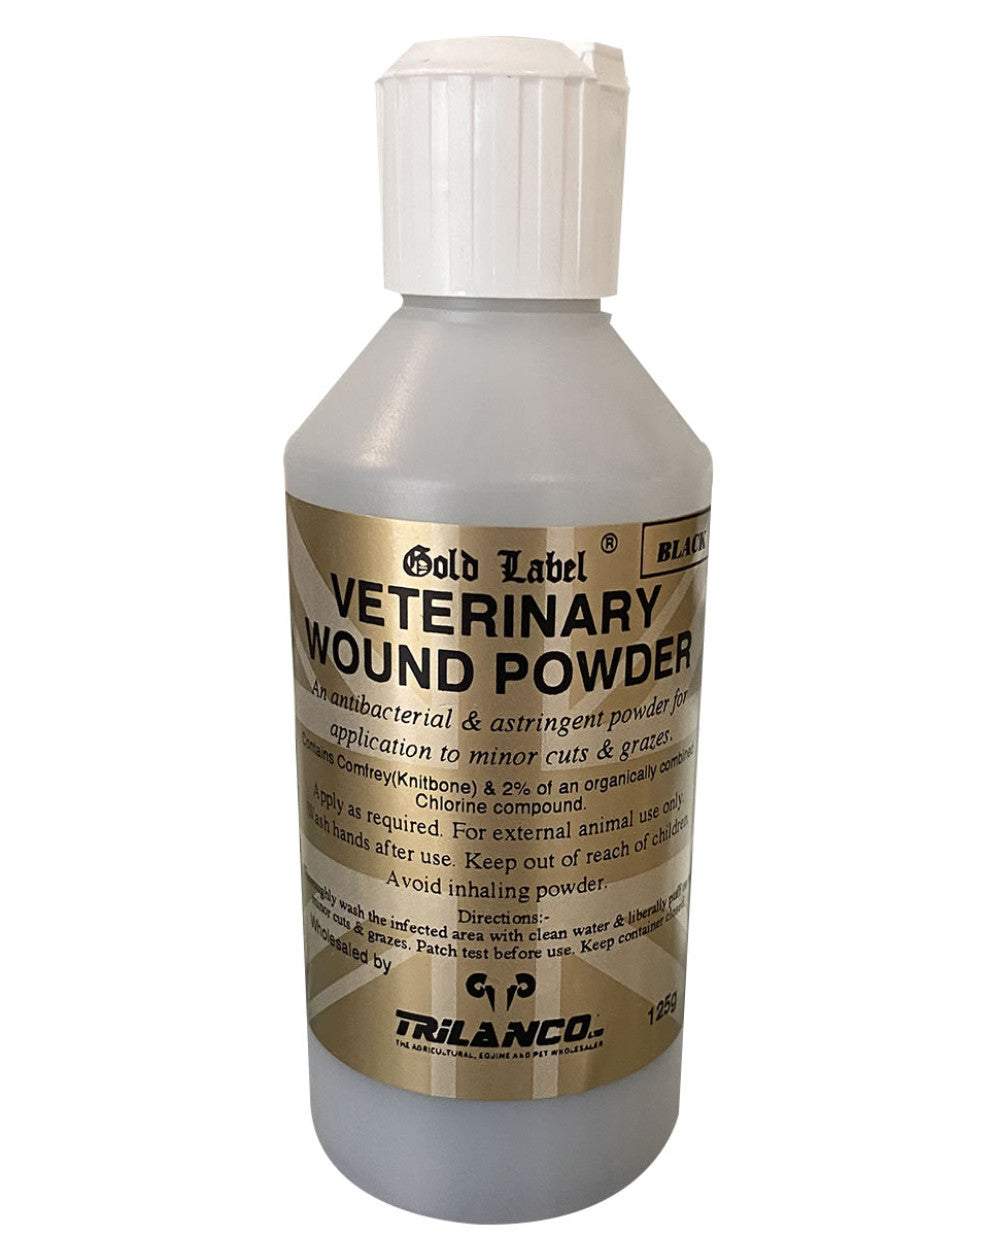 Black Coloured Gold Label Veterinary Wound Powder On A White Background 